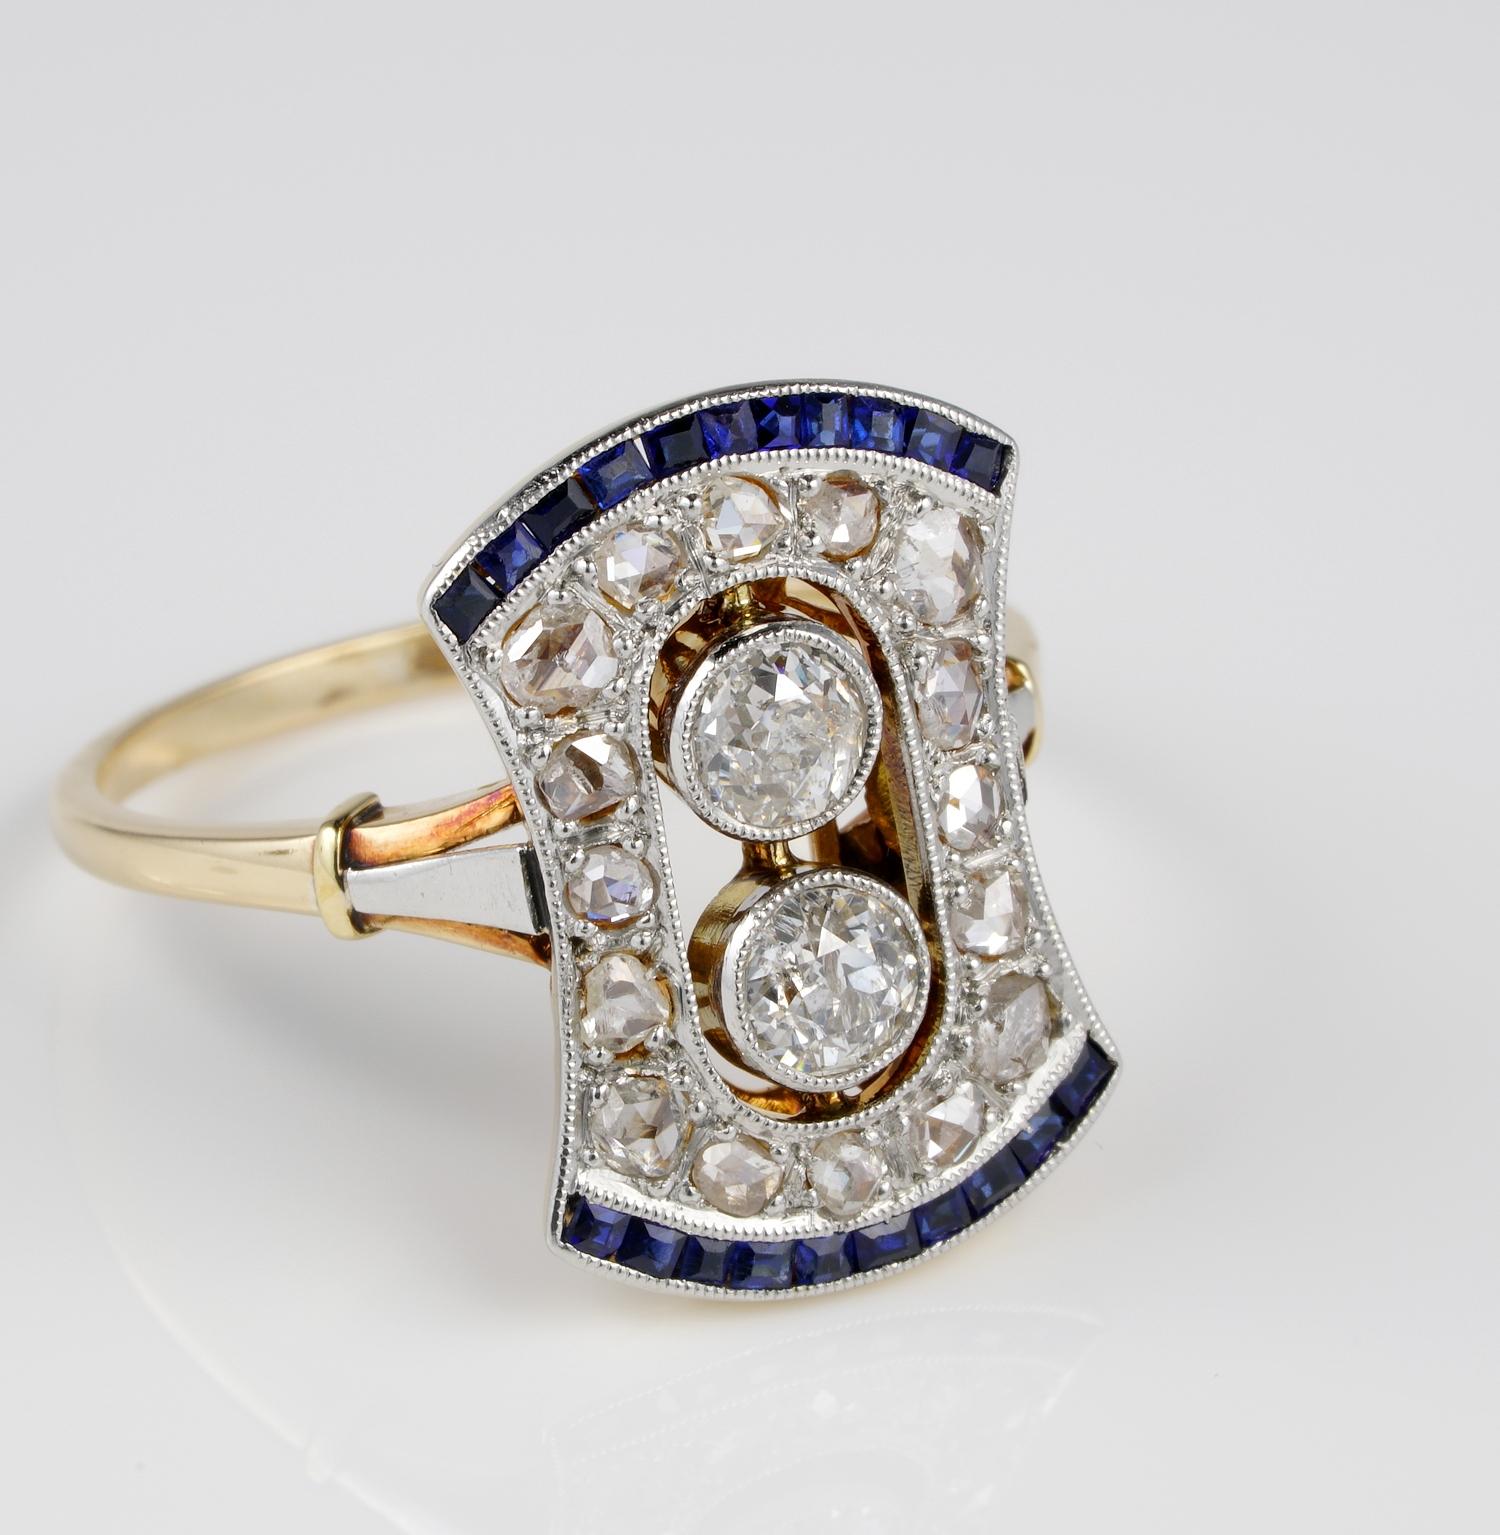 Striking and Dramatic 1910 ca

Quintessential, authentic, Edwardian ring, with charming design and gorgeous colour contrast
Very finely hand crafted during the very beginning of 1900 of 18 KT gold with Platinum top – tested
Flat profile of